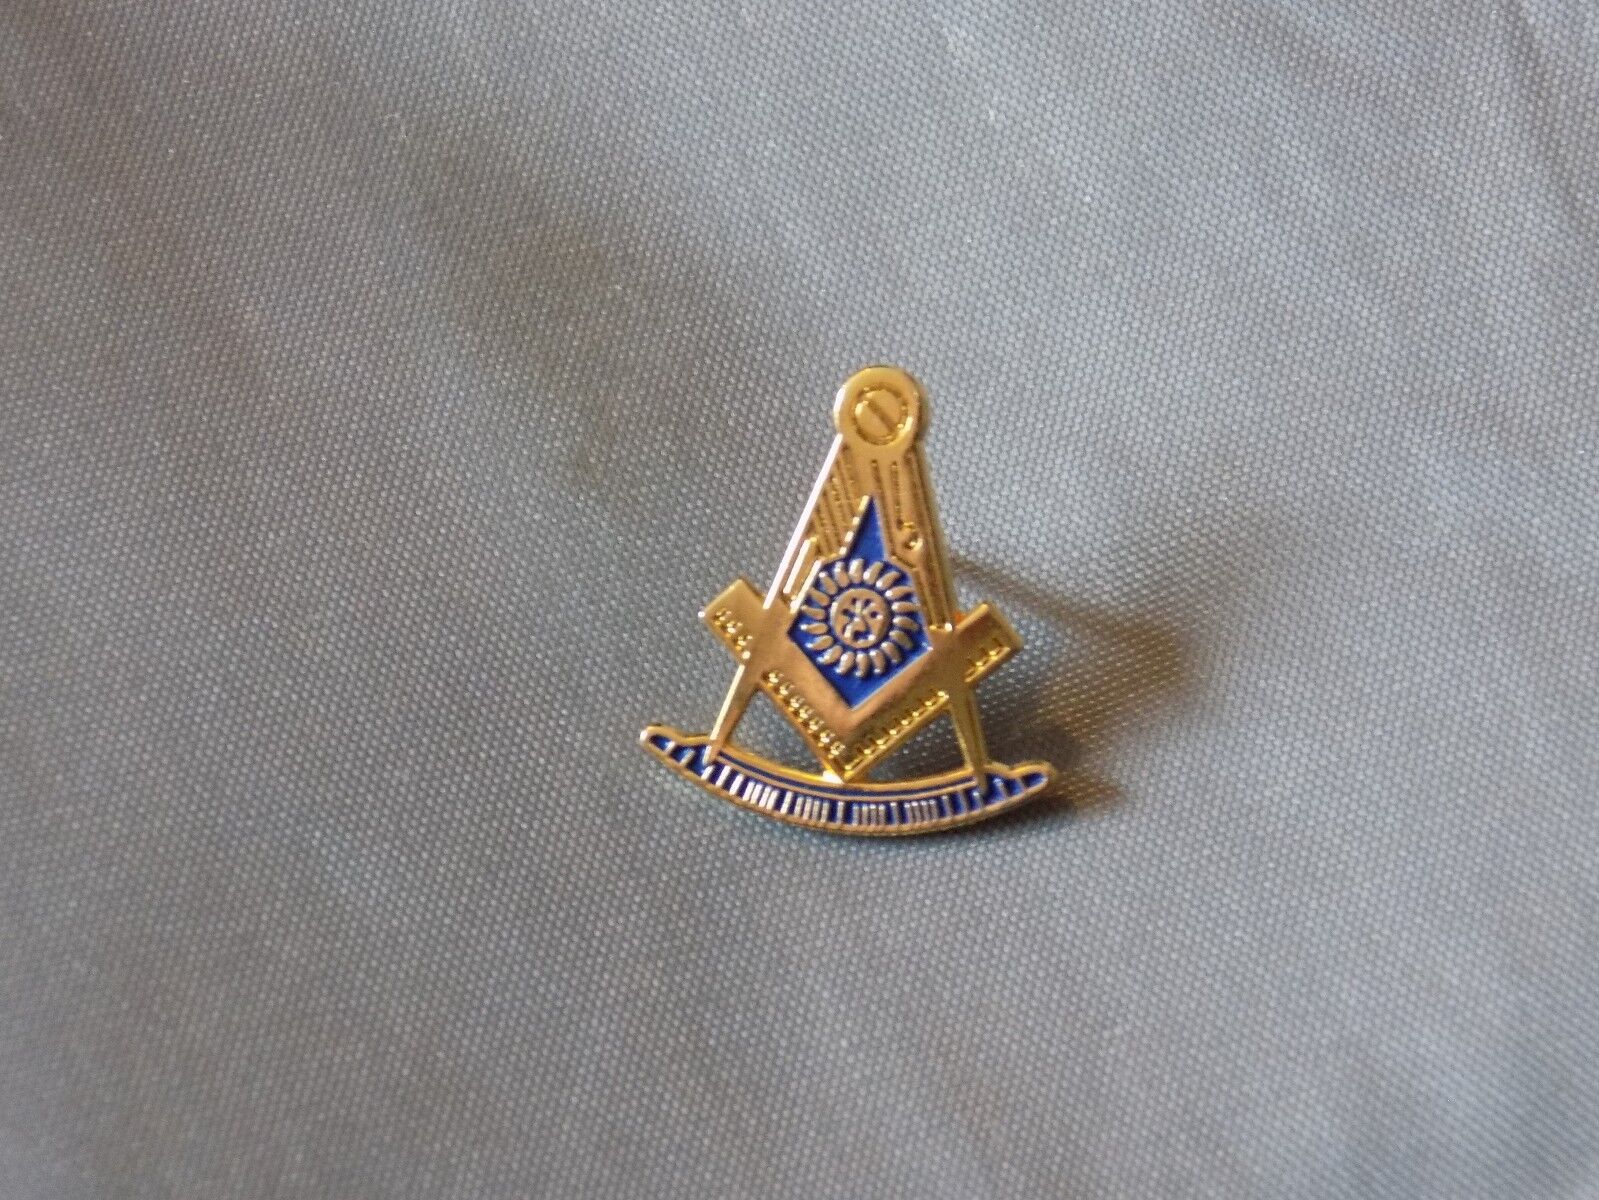  Masonic Lapel Tac Pin Cut Out Past Master with Square Sun Fraternity  NEW